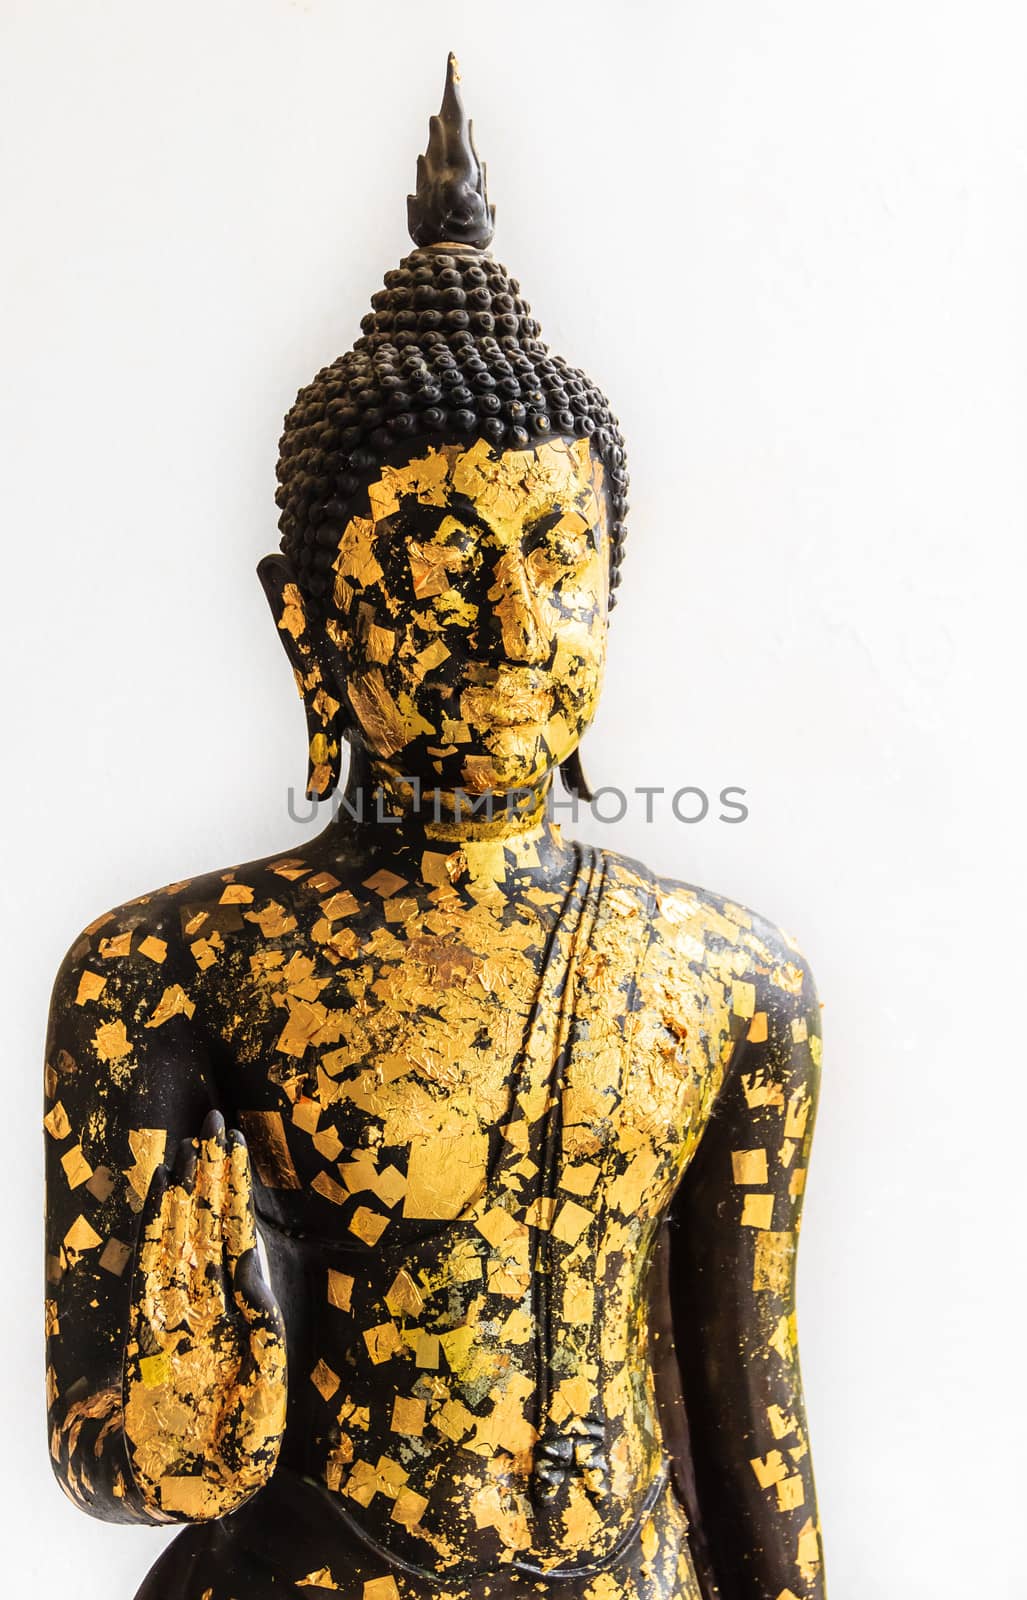 Black Buddha Statue covered with small Gold Plates isolated on W by punpleng